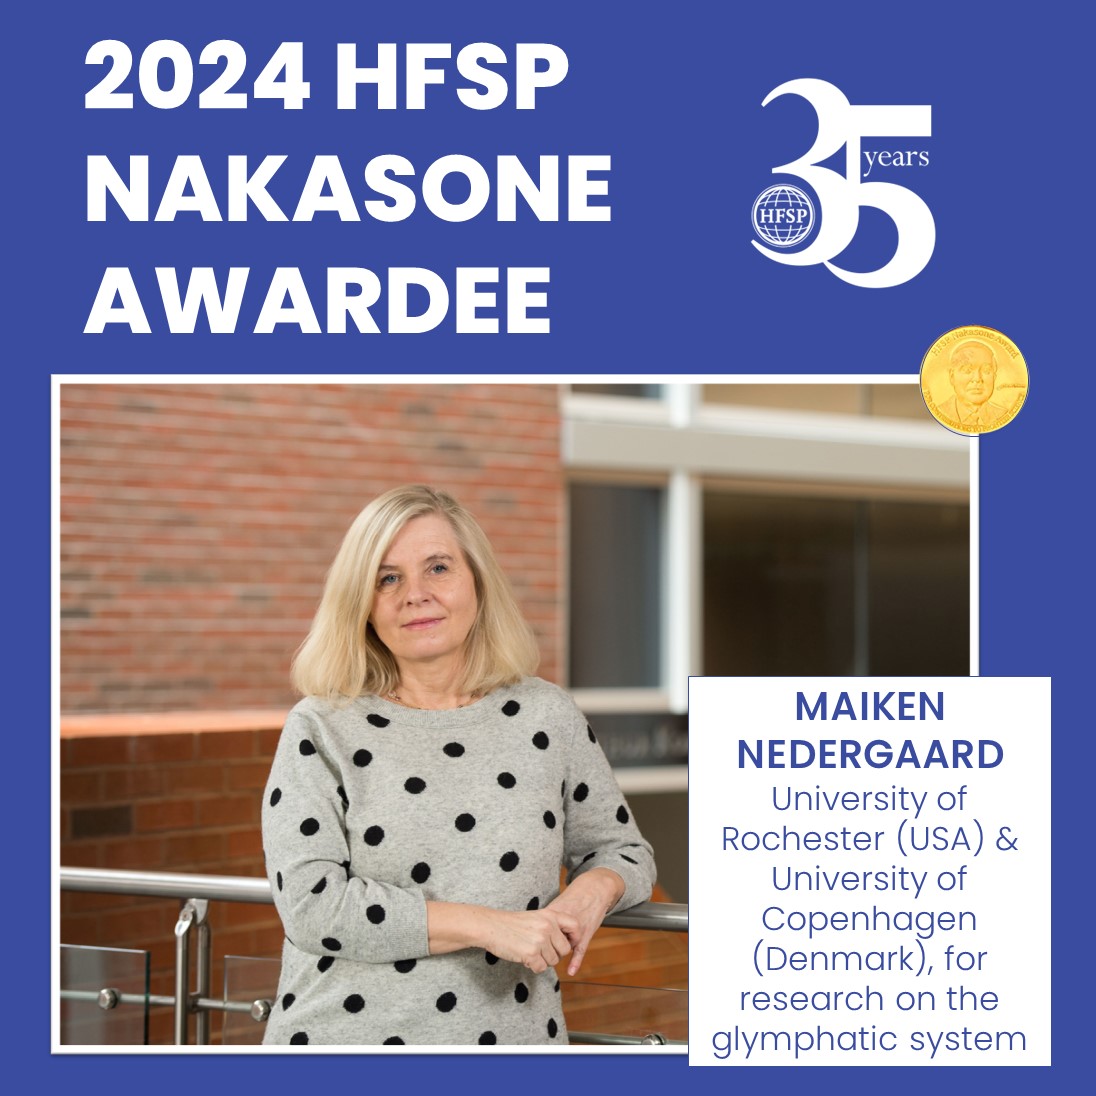 🤩Exciting News!🌟Maiken Nedergaard wins the 2024 #HFSPNakasoneAward for her groundbreaking research on the glymphatic system, shedding light on the vital role of sleep in brain health. Learn more: bit.ly/3ITheuR Congrats @NedergaardLab!👏👏👏🥳 #HFSP